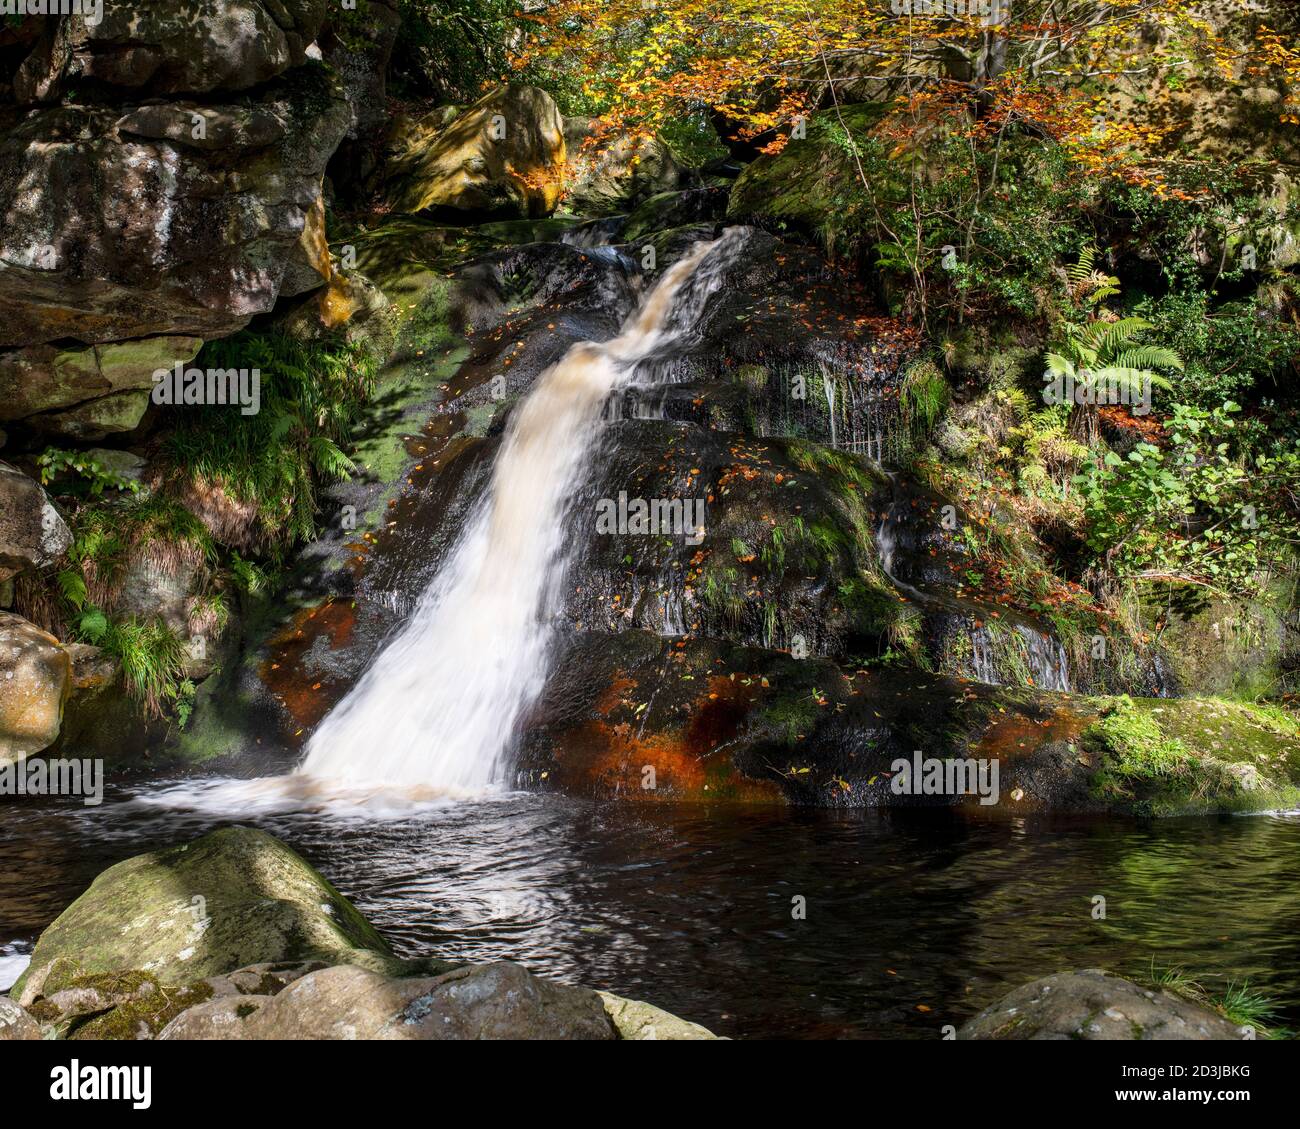 The sylvan setting of Upper Posforth Gill waterfall, Valley of Desolation, Yorkshire, UK Stock Photo